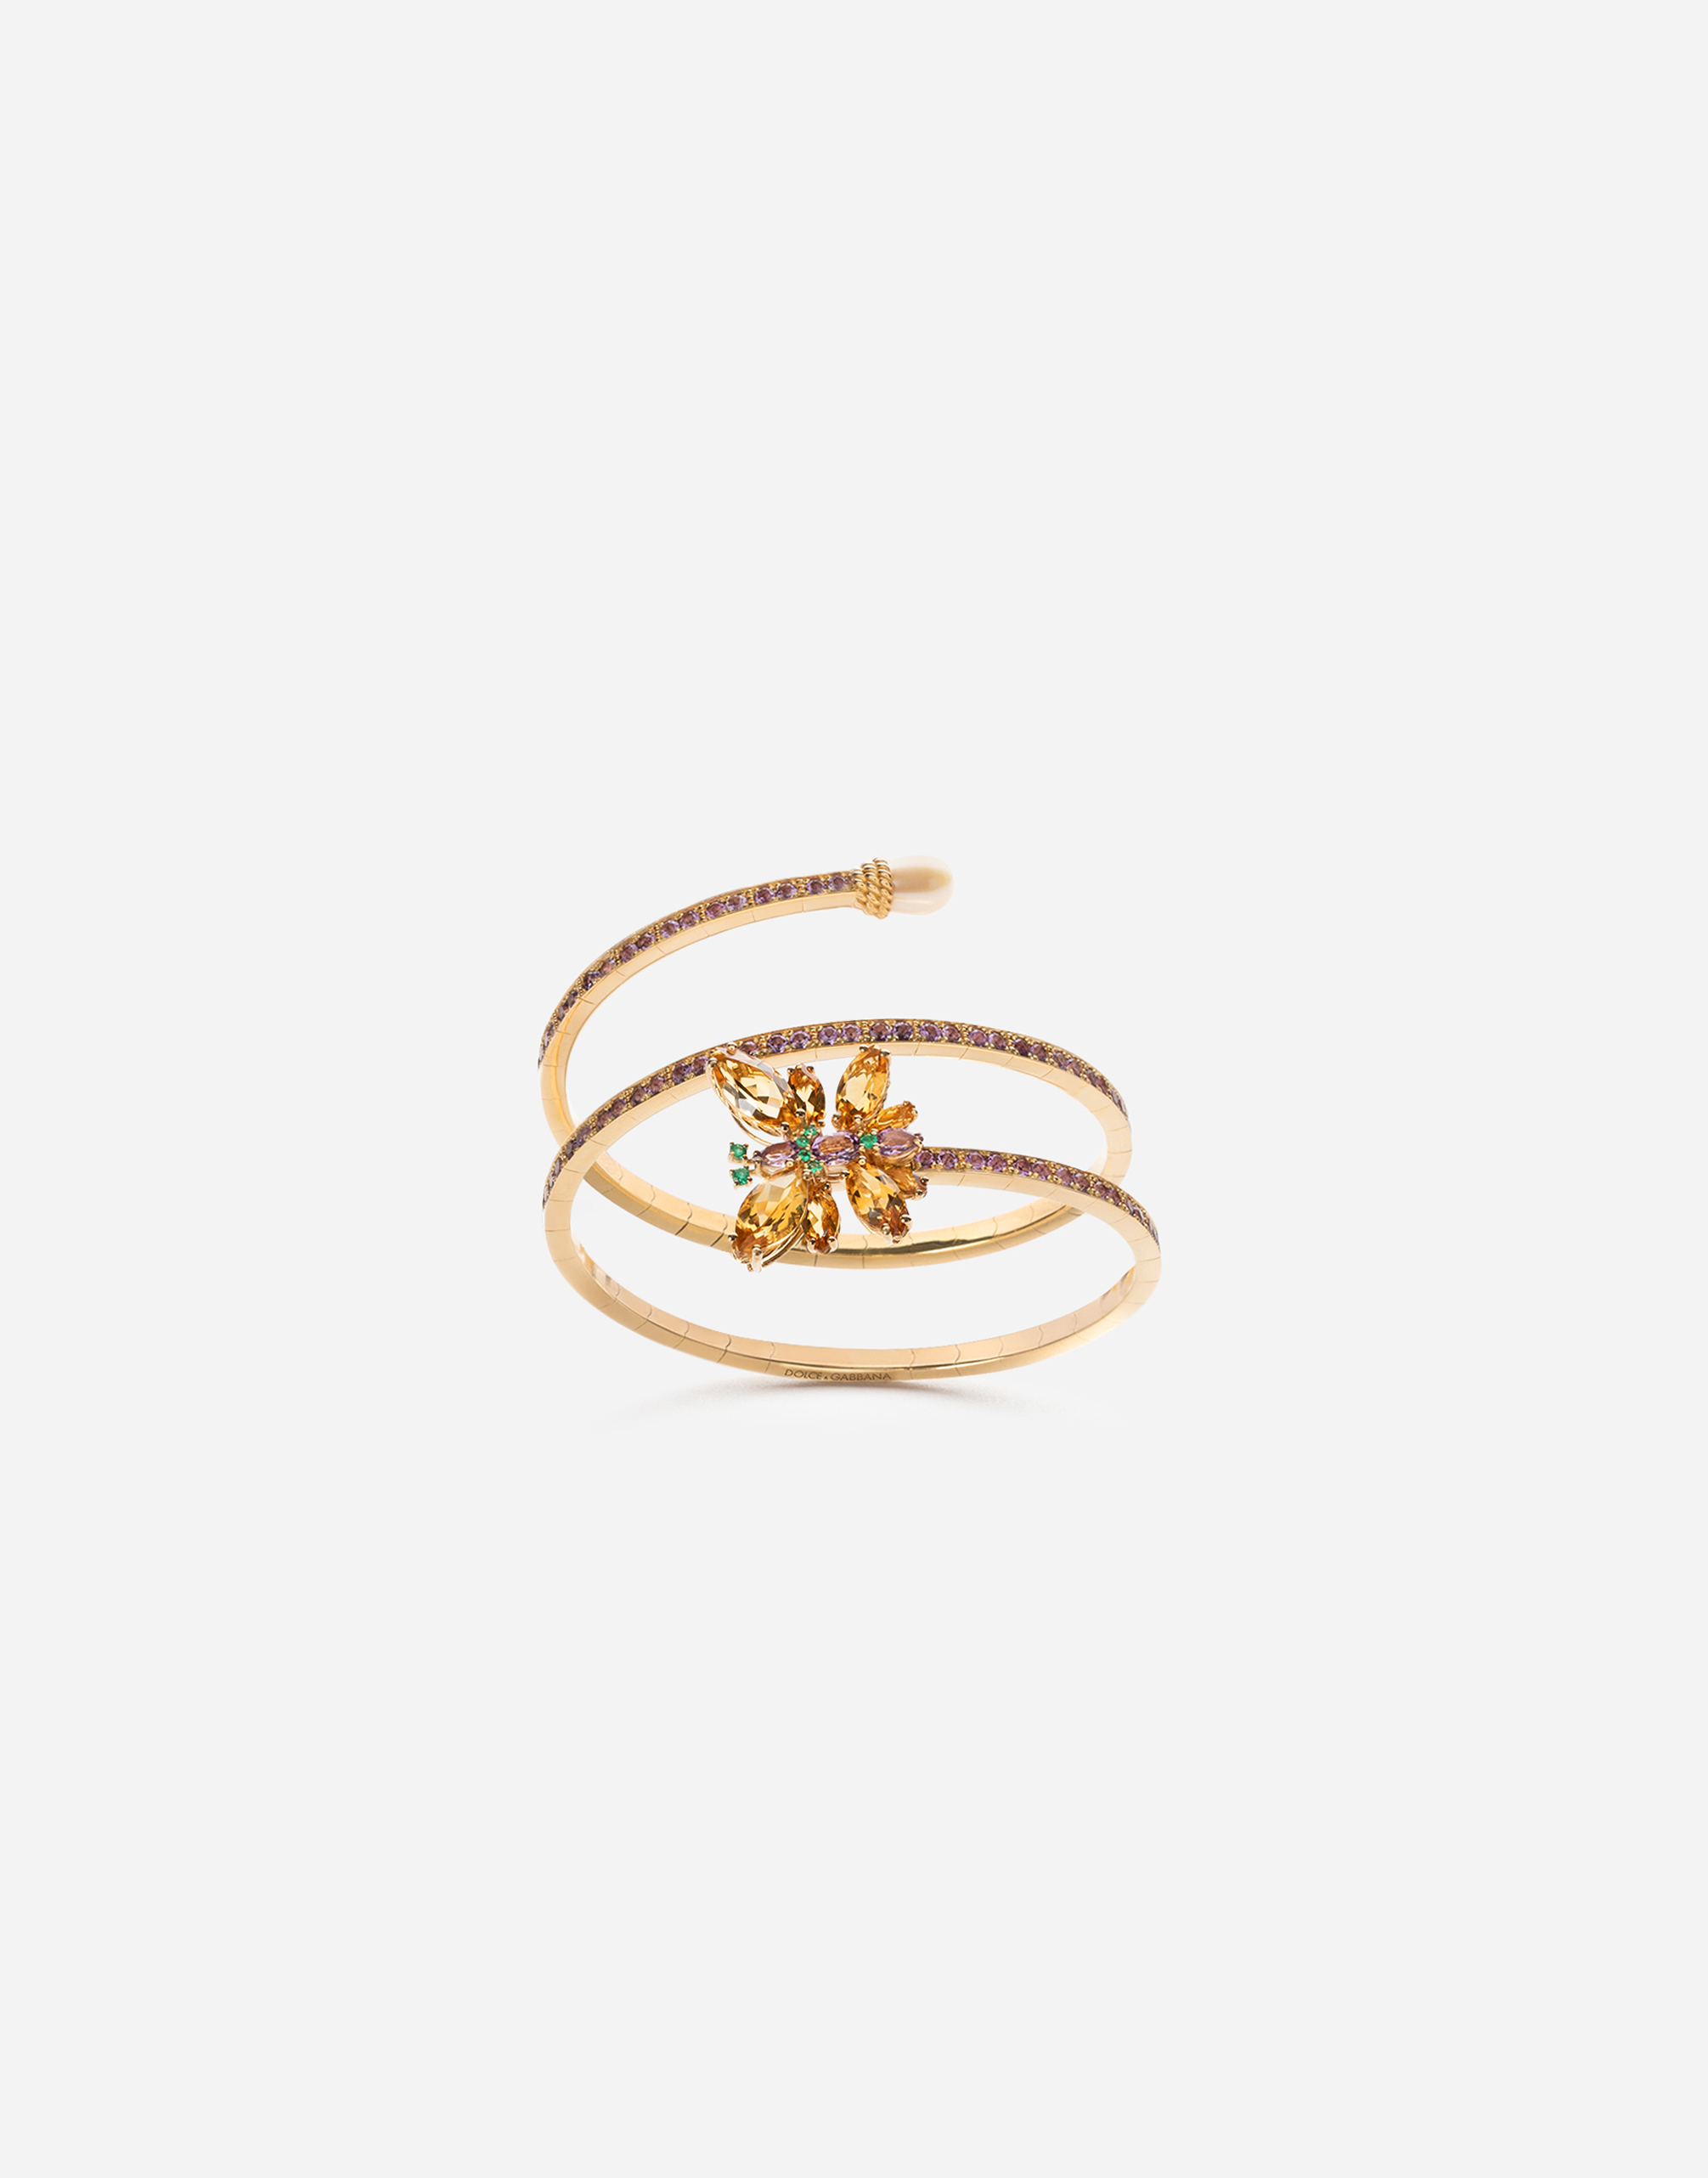 Spring yellow gold bracelet with butterfly-shaped settings in Gold